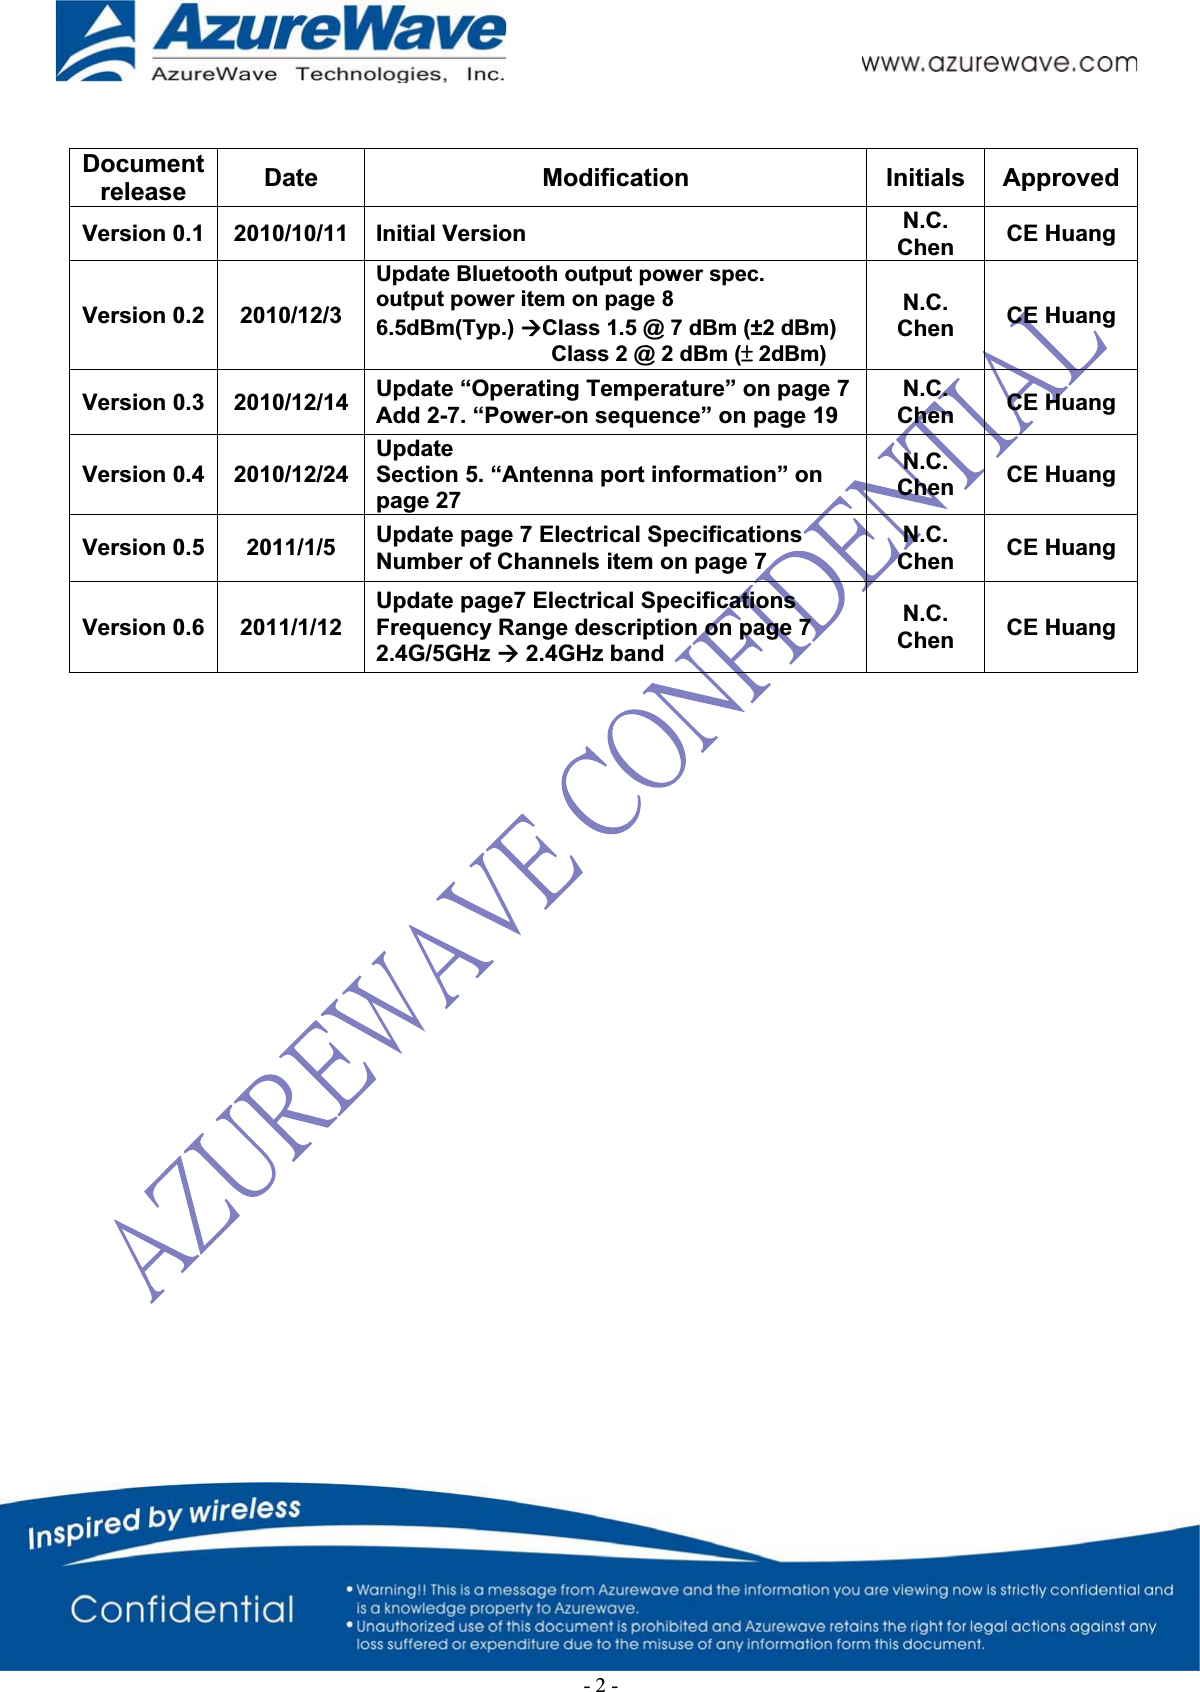  Document release  Date Modification Initials ApprovedVersion 0.1  2010/10/11 Initial Version  N.C.  Chen  CE Huang Version 0.2  2010/12/3 Update Bluetooth output power spec. output power item on page 8 6.5dBm(Typ.) ÆClass 1.5 @ 7 dBm (±2 dBm) Class 2 @ 2 dBm (̈́ 2dBm) N.C.  Chen  CE Huang Version 0.3  2010/12/14 Update “Operating Temperature” on page 7Add 2-7. “Power-on sequence” on page 19 N.C.  Chen  CE Huang Version 0.4  2010/12/24Update  Section 5. “Antenna port information” on page 27 N.C.  Chen  CE Huang Version 0.5  2011/1/5  Update page 7 Electrical Specifications Number of Channels item on page 7 N.C.  Chen  CE Huang Version 0.6  2011/1/12 Update page7 Electrical Specifications Frequency Range description on page 7 2.4G/5GHz Æ 2.4GHz band N.C.  Chen  CE Huang -2-